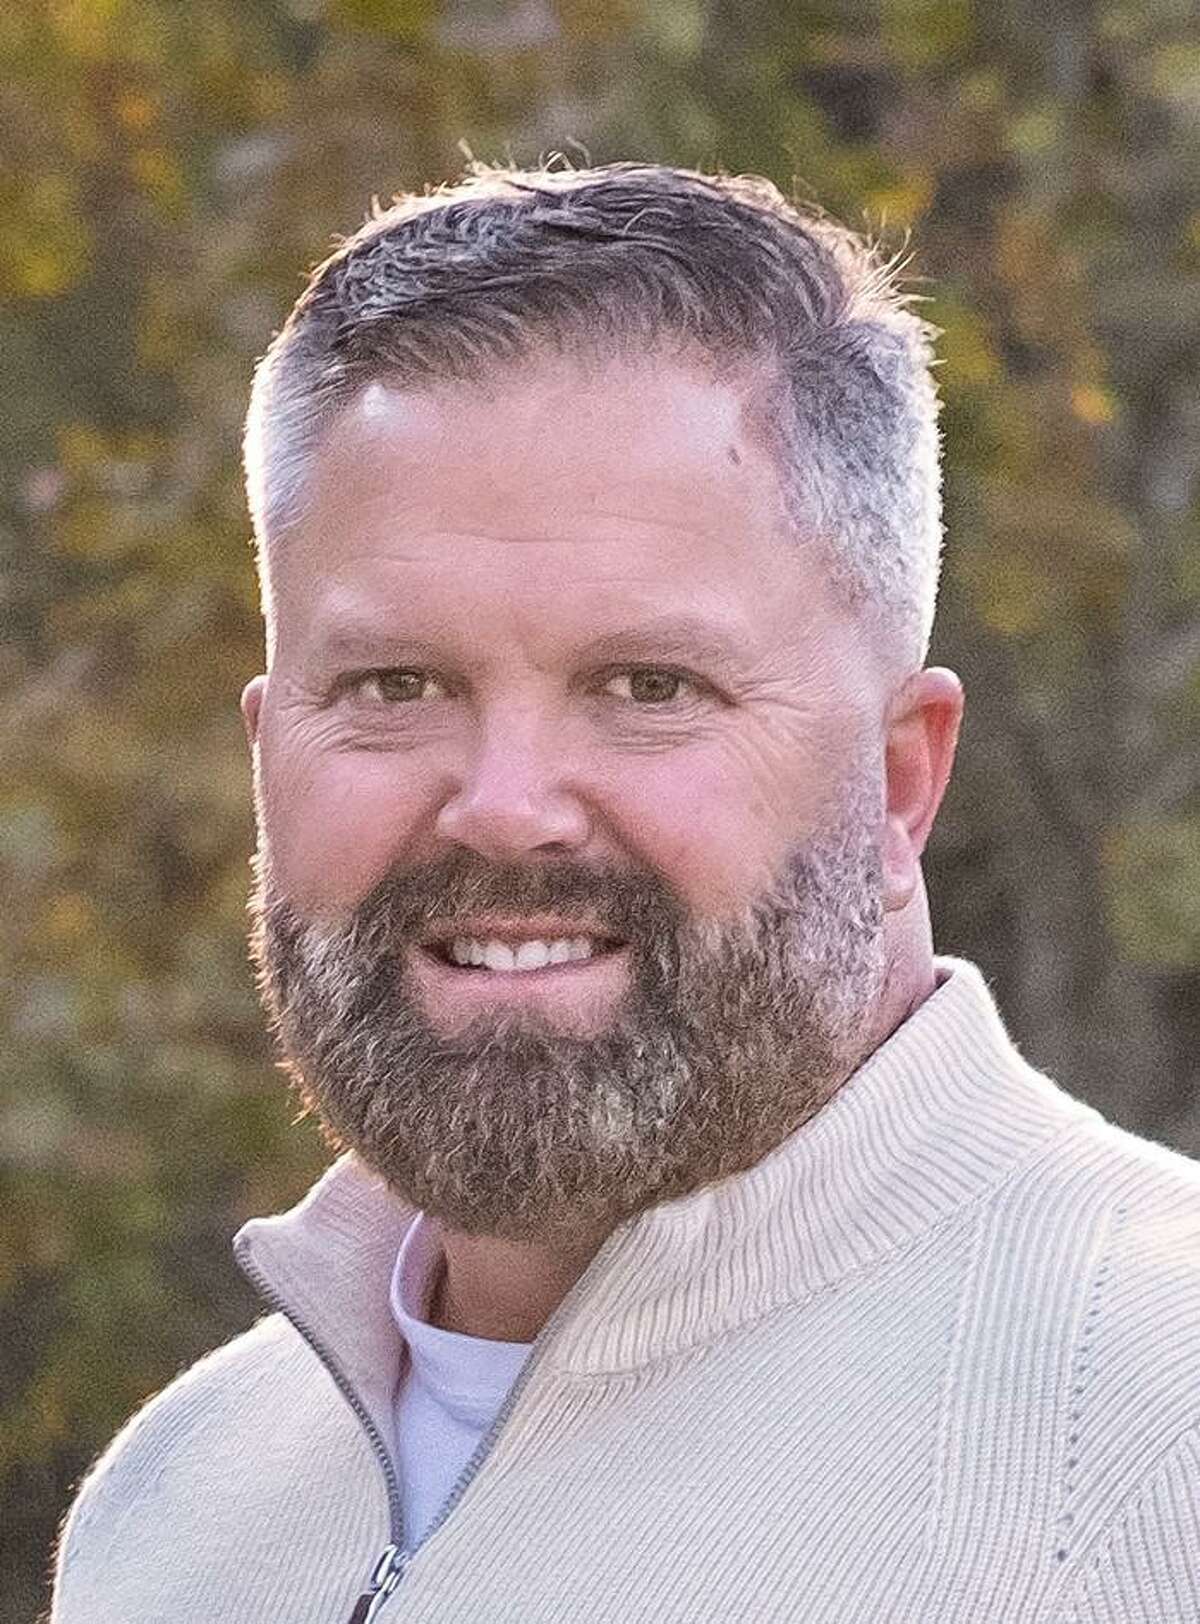 Larry Troy is the new head coach of the Splendora girls soccer program. Troy was an assistant coach during the 2021 season.